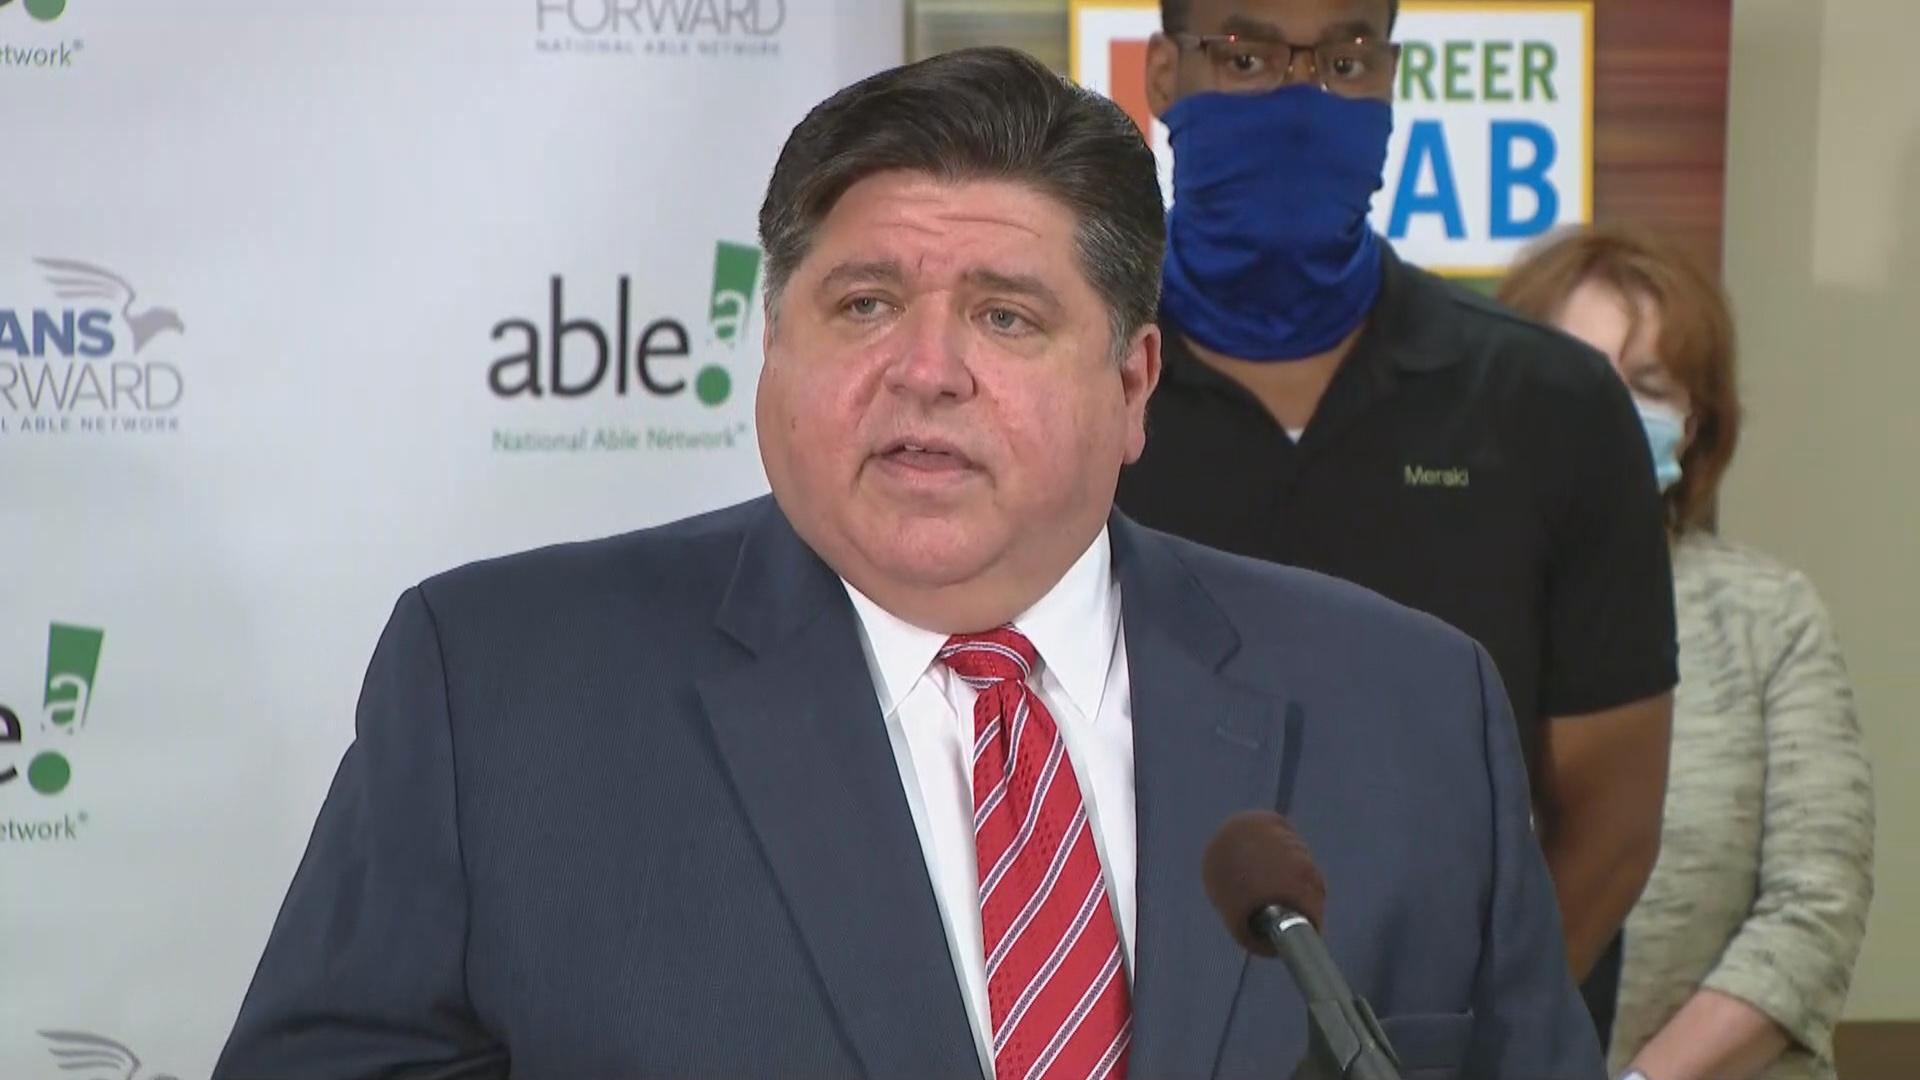 Gov. J.B. Pritzker announces an apprenticeship program expansion on Tuesday, July 14, 2020, in Chicago. (WTTW News)